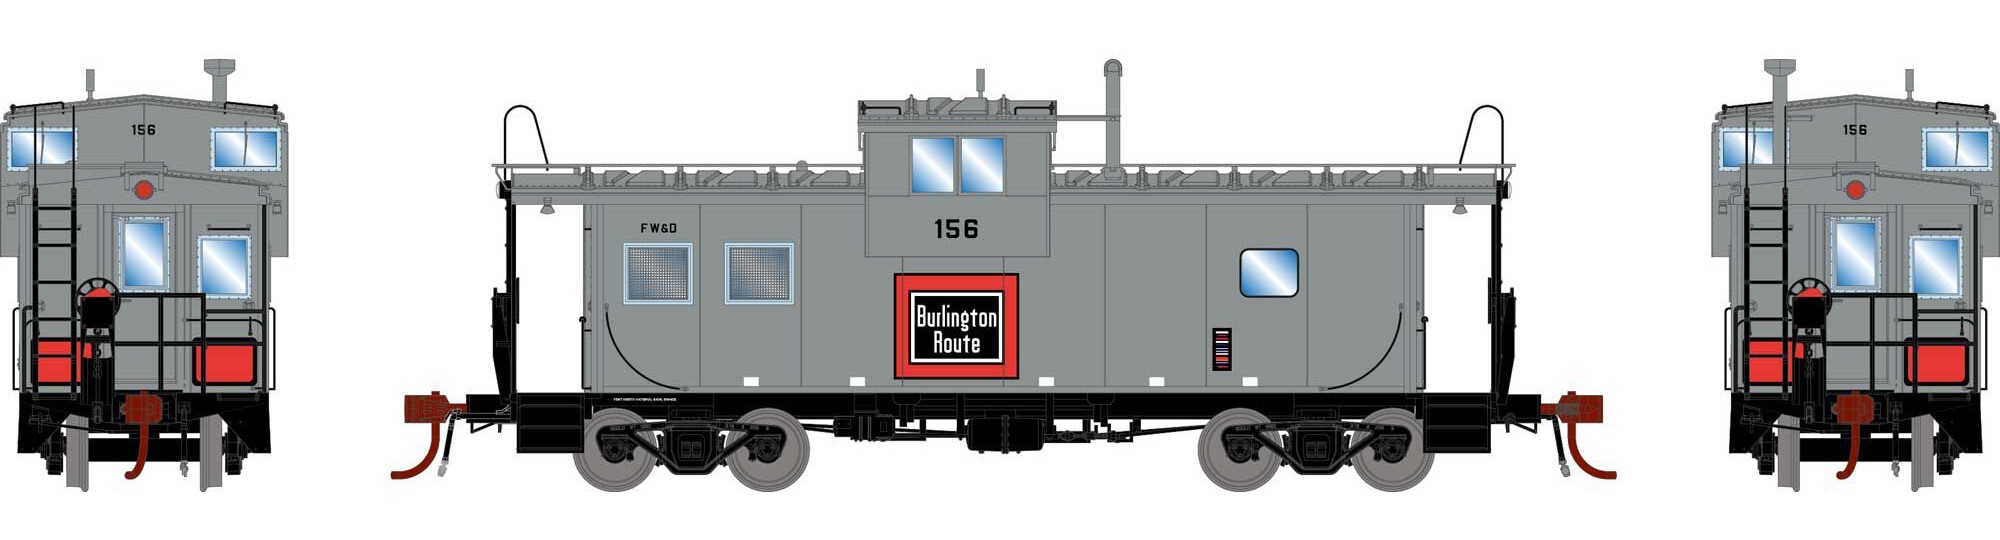 Athearn Genesis HO ATHG78571 DCC/NCE Equipped ICC Caboose With Lights Fort Worth & Dodge 'Burlington Route' FW&D #156